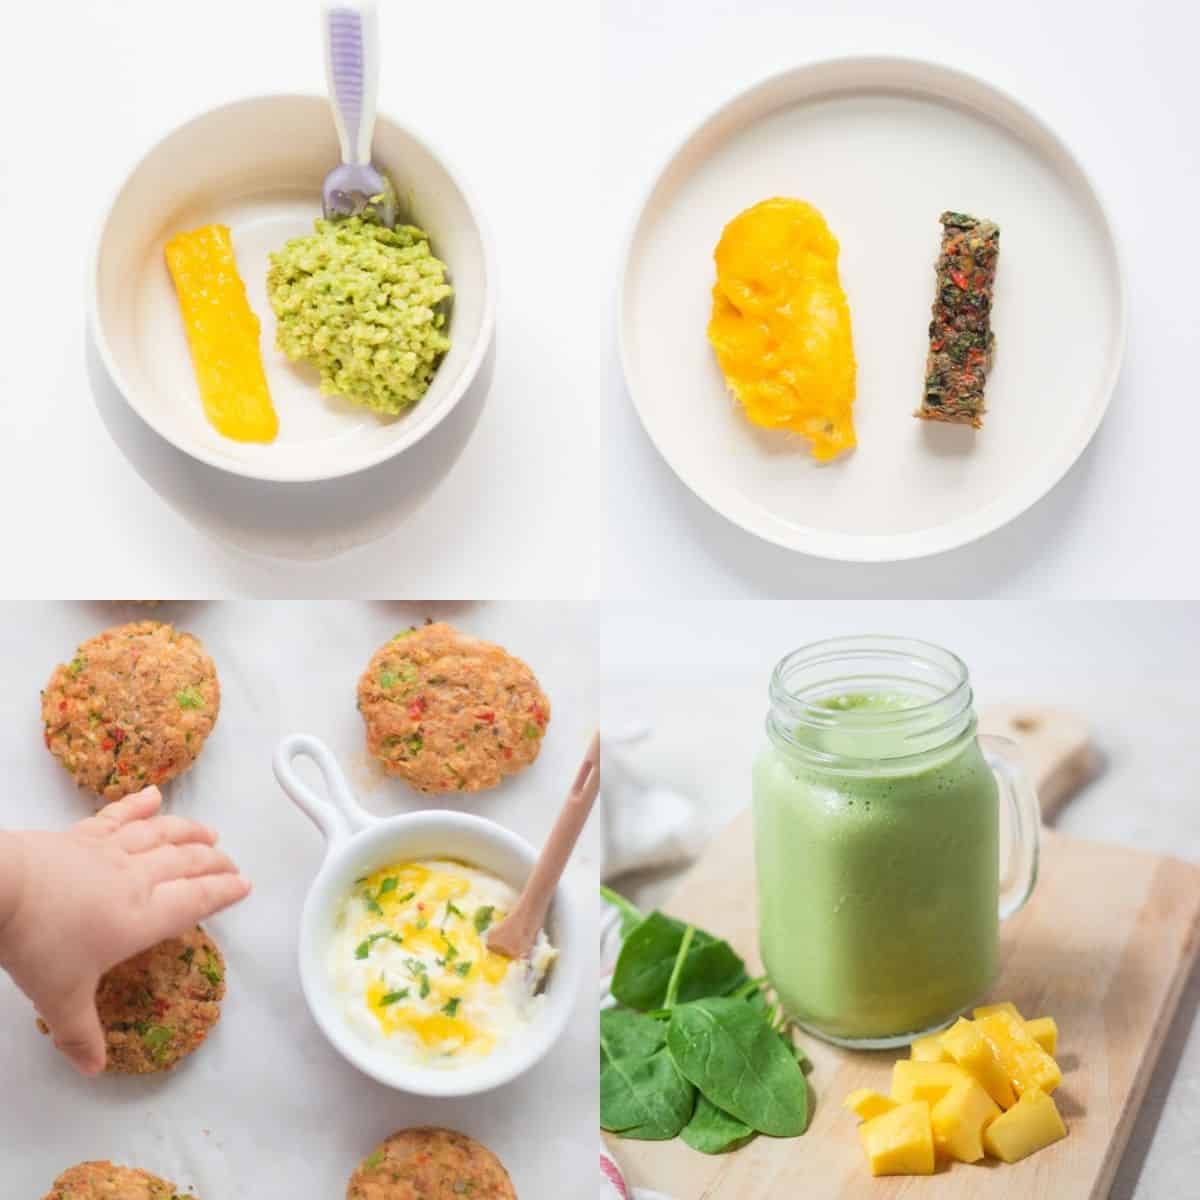 a four image collage with meal ideas with mangoes, including a strip of mango, mango pit, mango yogurt, and spinach mango smoothie.